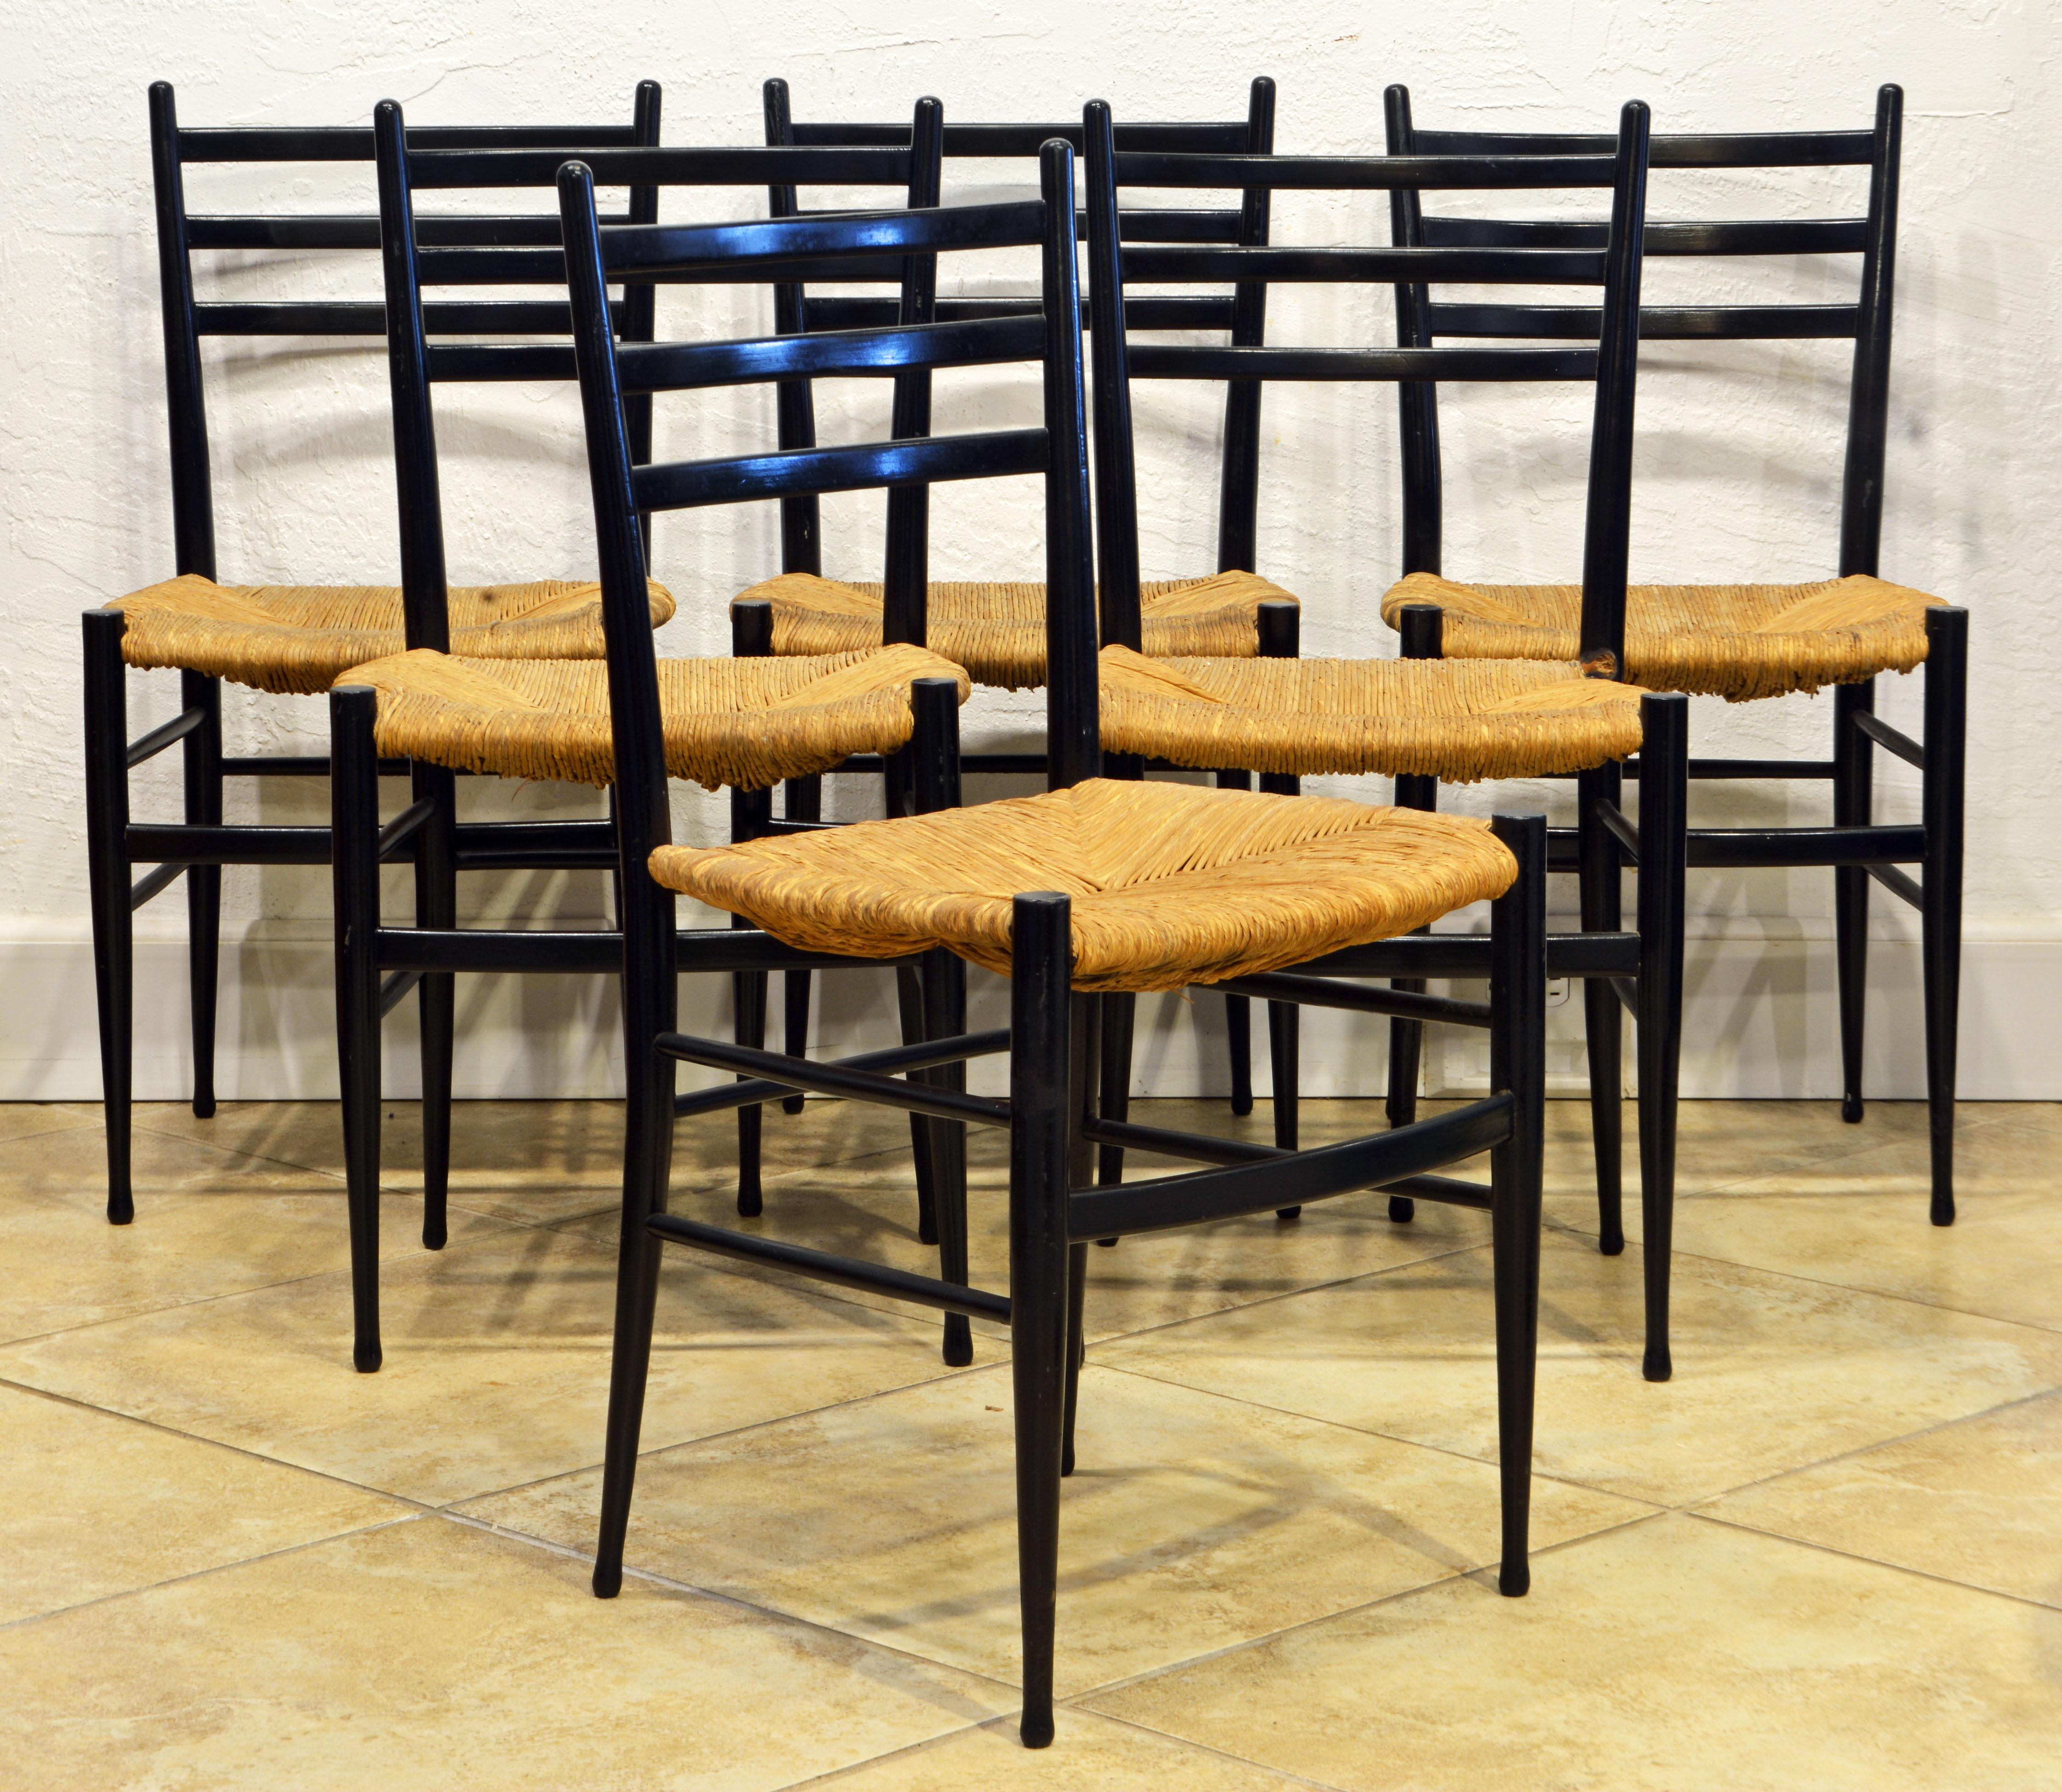 In spite of the small frame dimensions these Italian dining chairs are amazingly sturdy thanks to a brilliant design. They are elegant minimalist chairs and the rush seats add a touch of southern charm. The chairs are all embossed with 'Made in